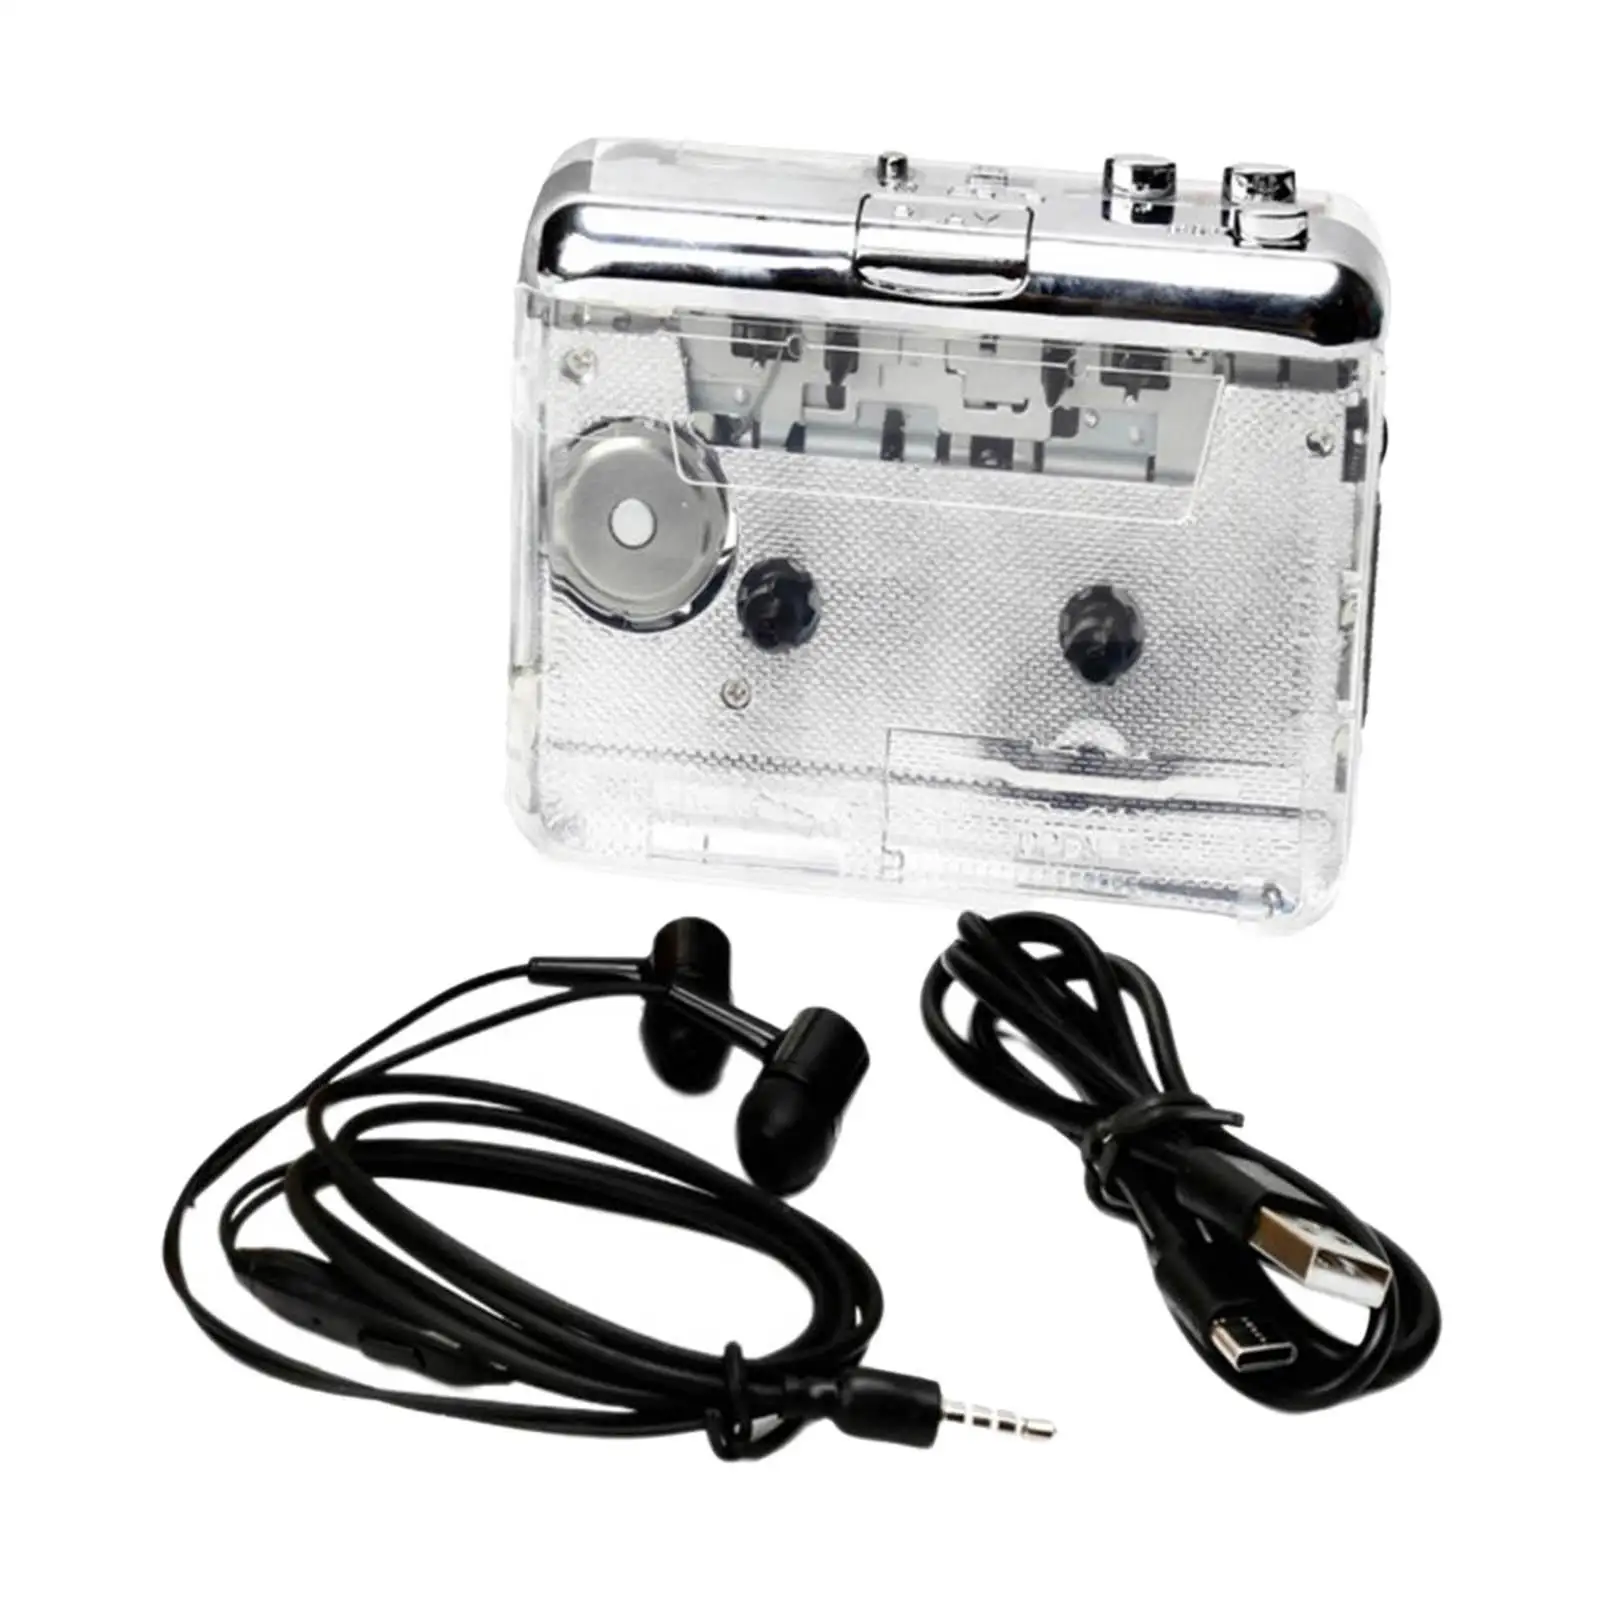 USB Cassette Tape to MP3 CD Music Cassette Player USB Cassette Tape to MP3 Converter Capture for Laptop PC Personal Computers